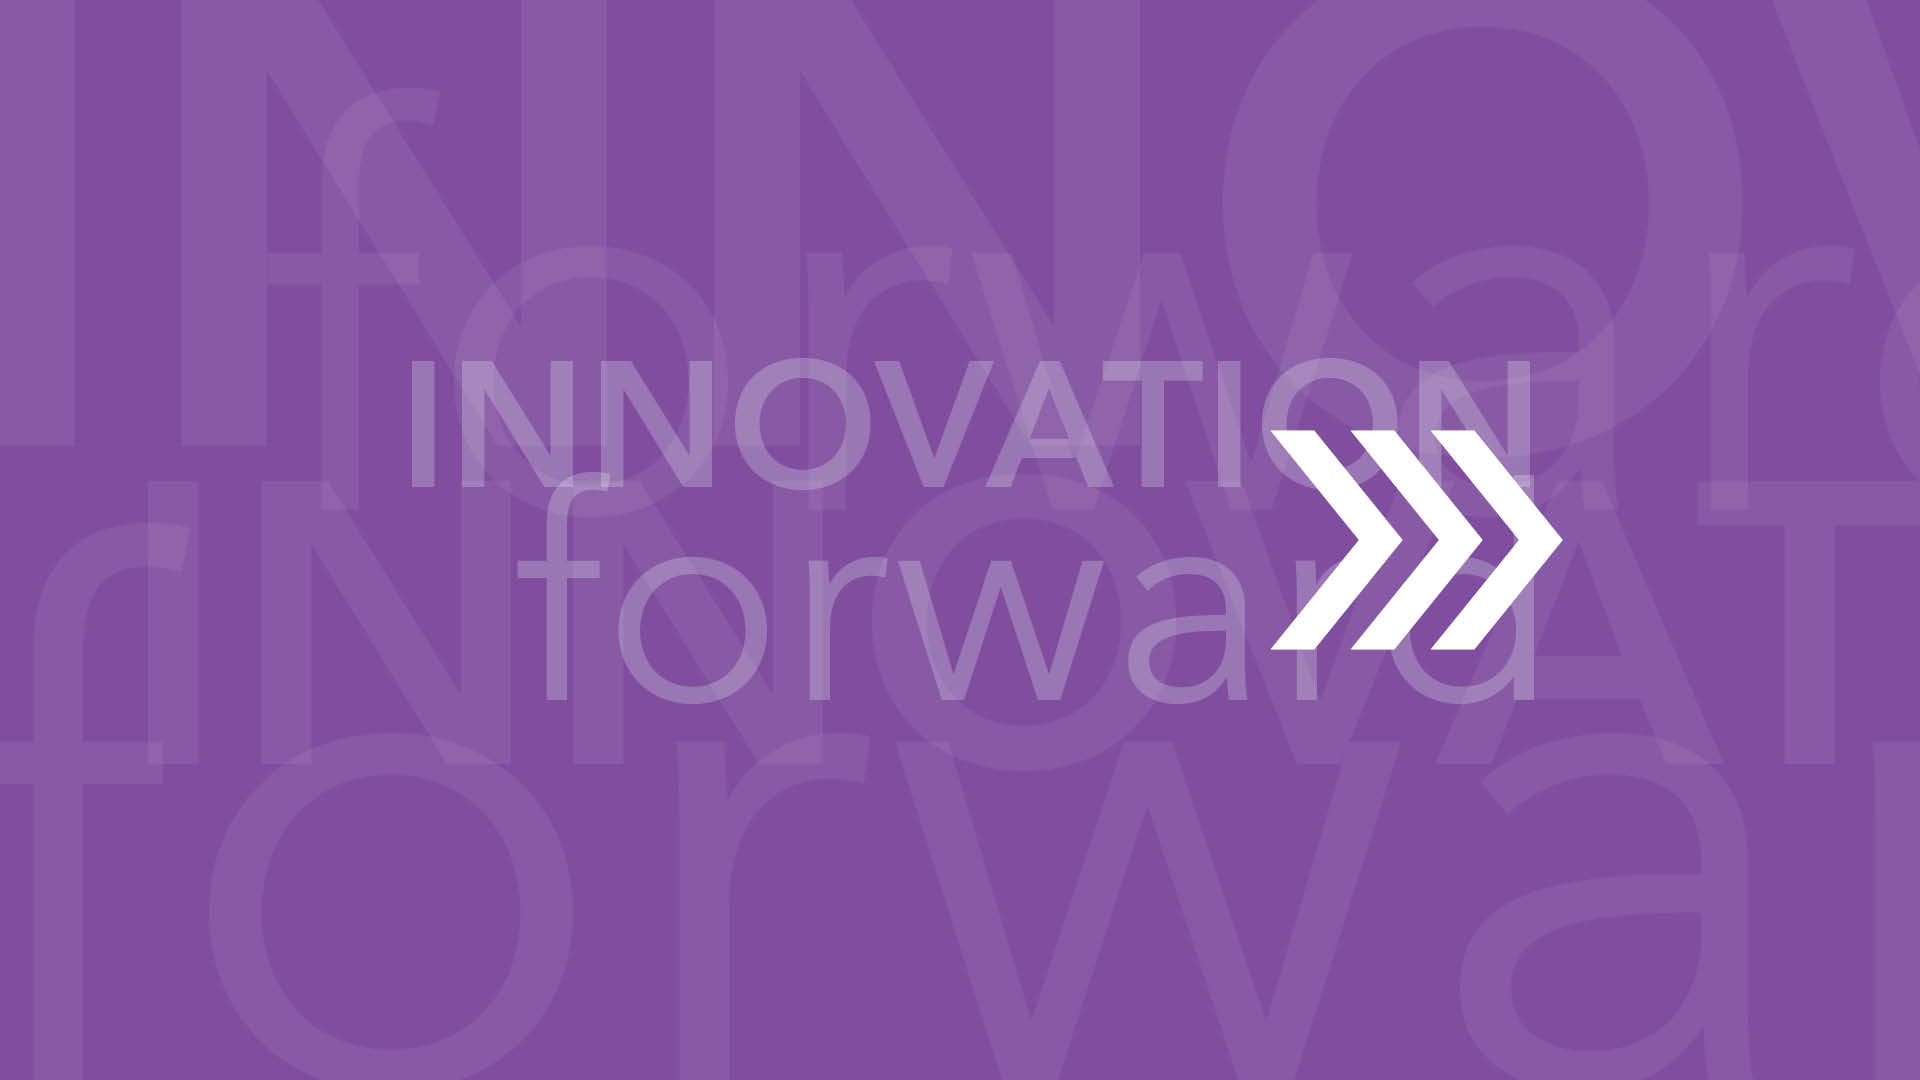 colorful banner showing an icon that represents the theme to Ever Press Forward Through Innovation